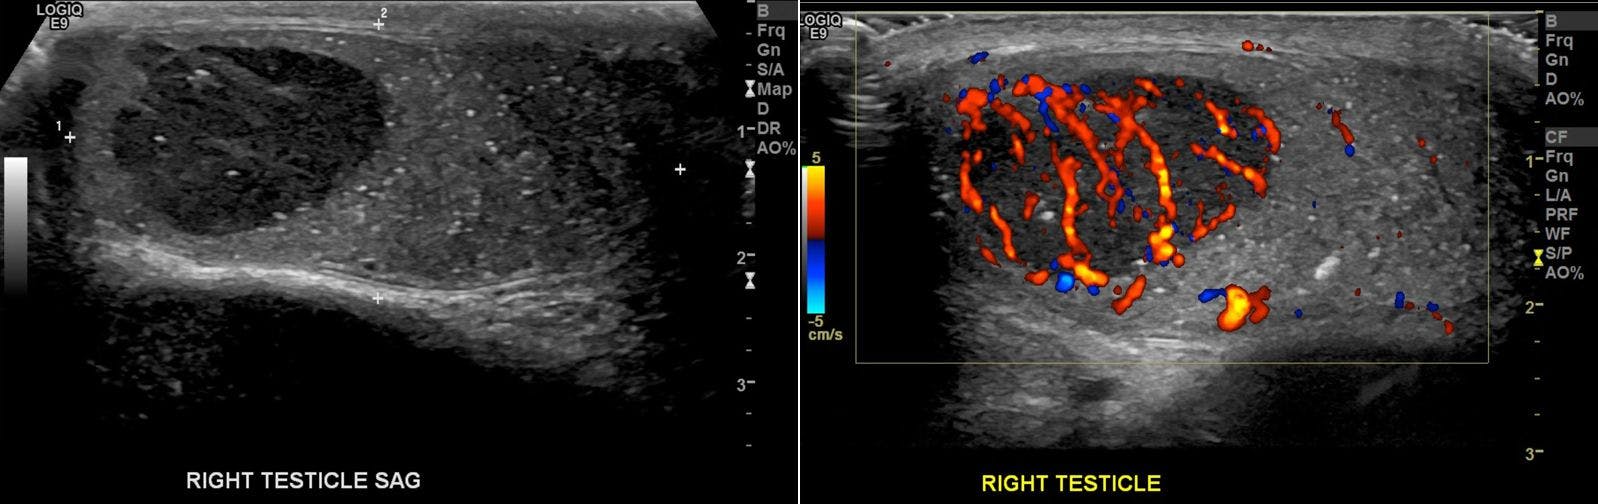 Palpable Nodule in Testicle of Young Man